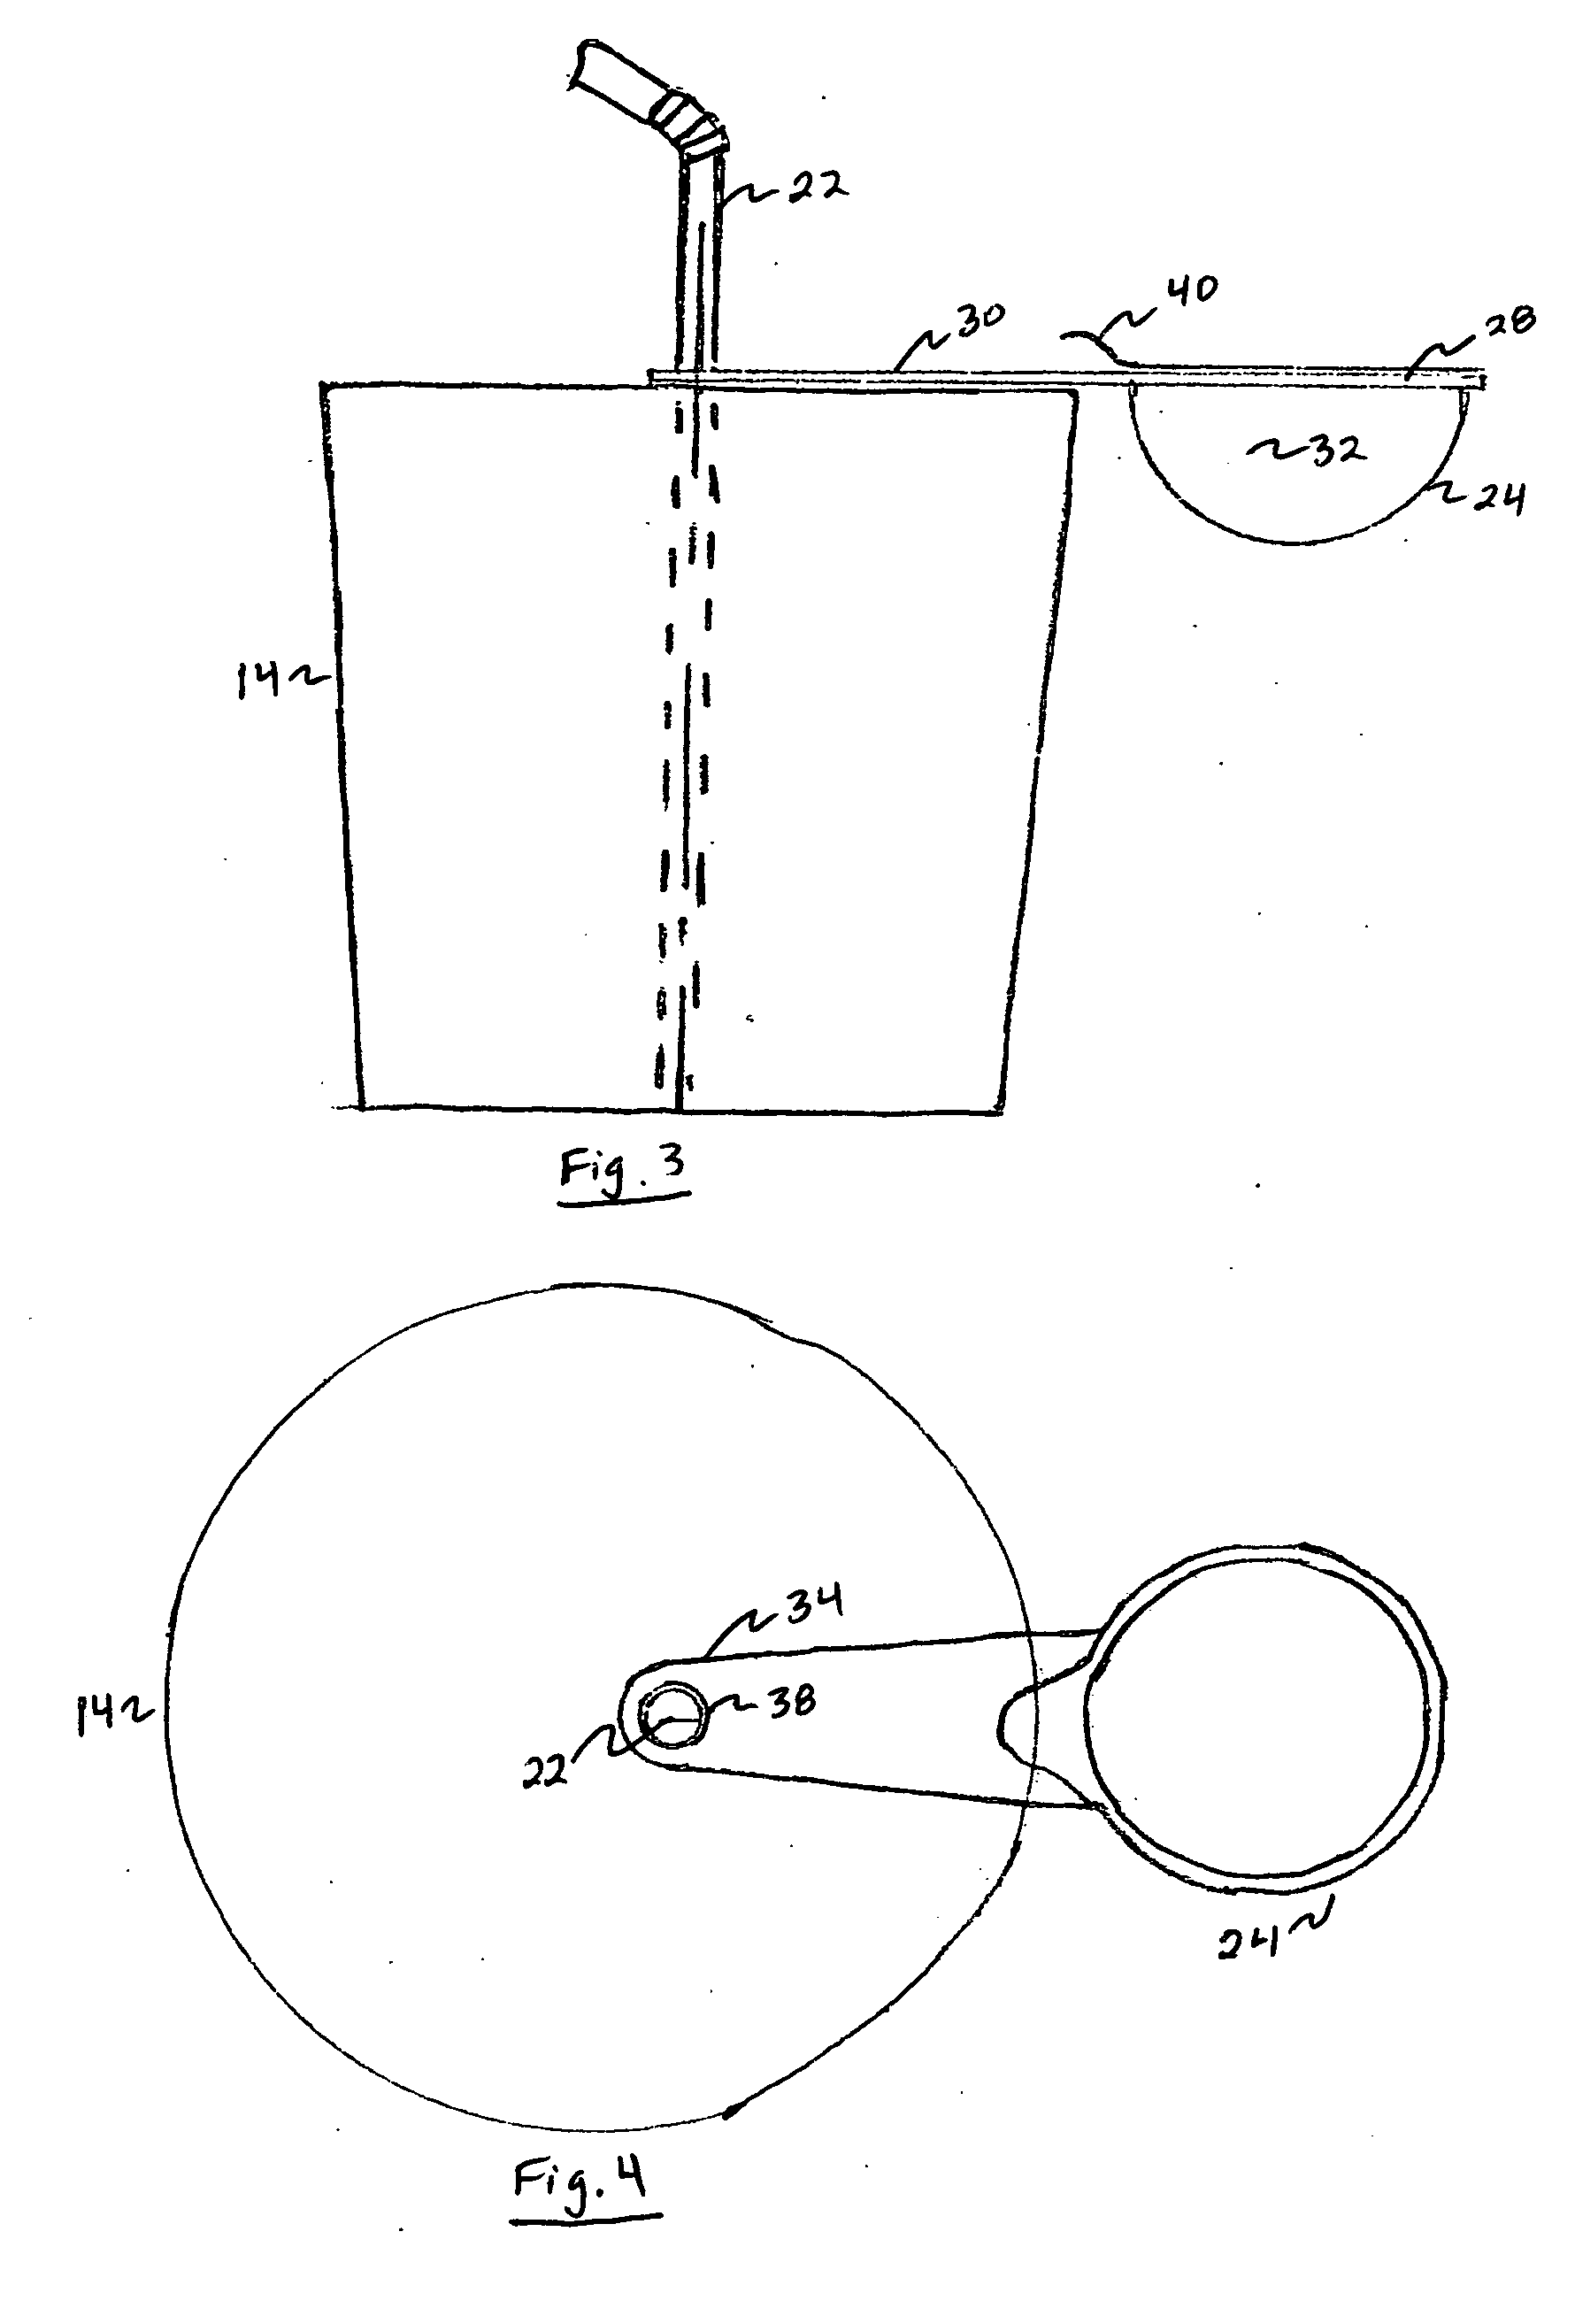 Attachable condiment cup assembly